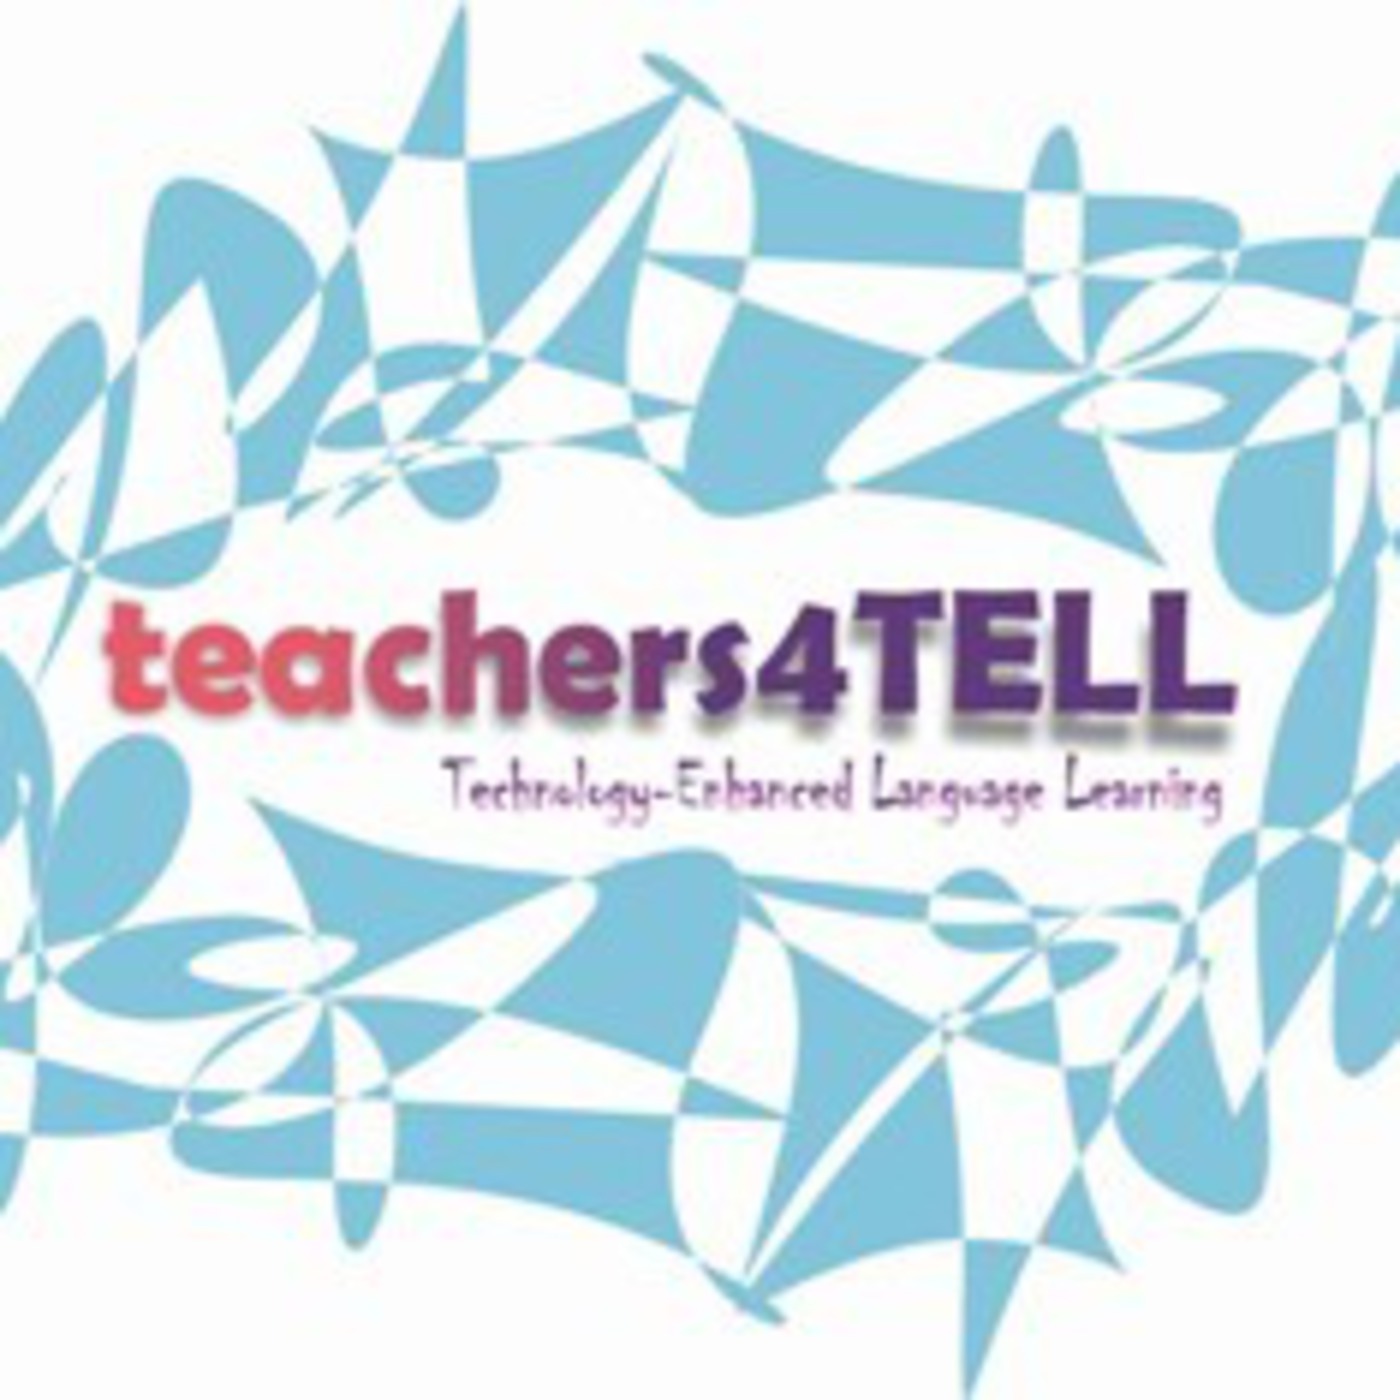 Teachers4TELL - Getting Started for The Real Show